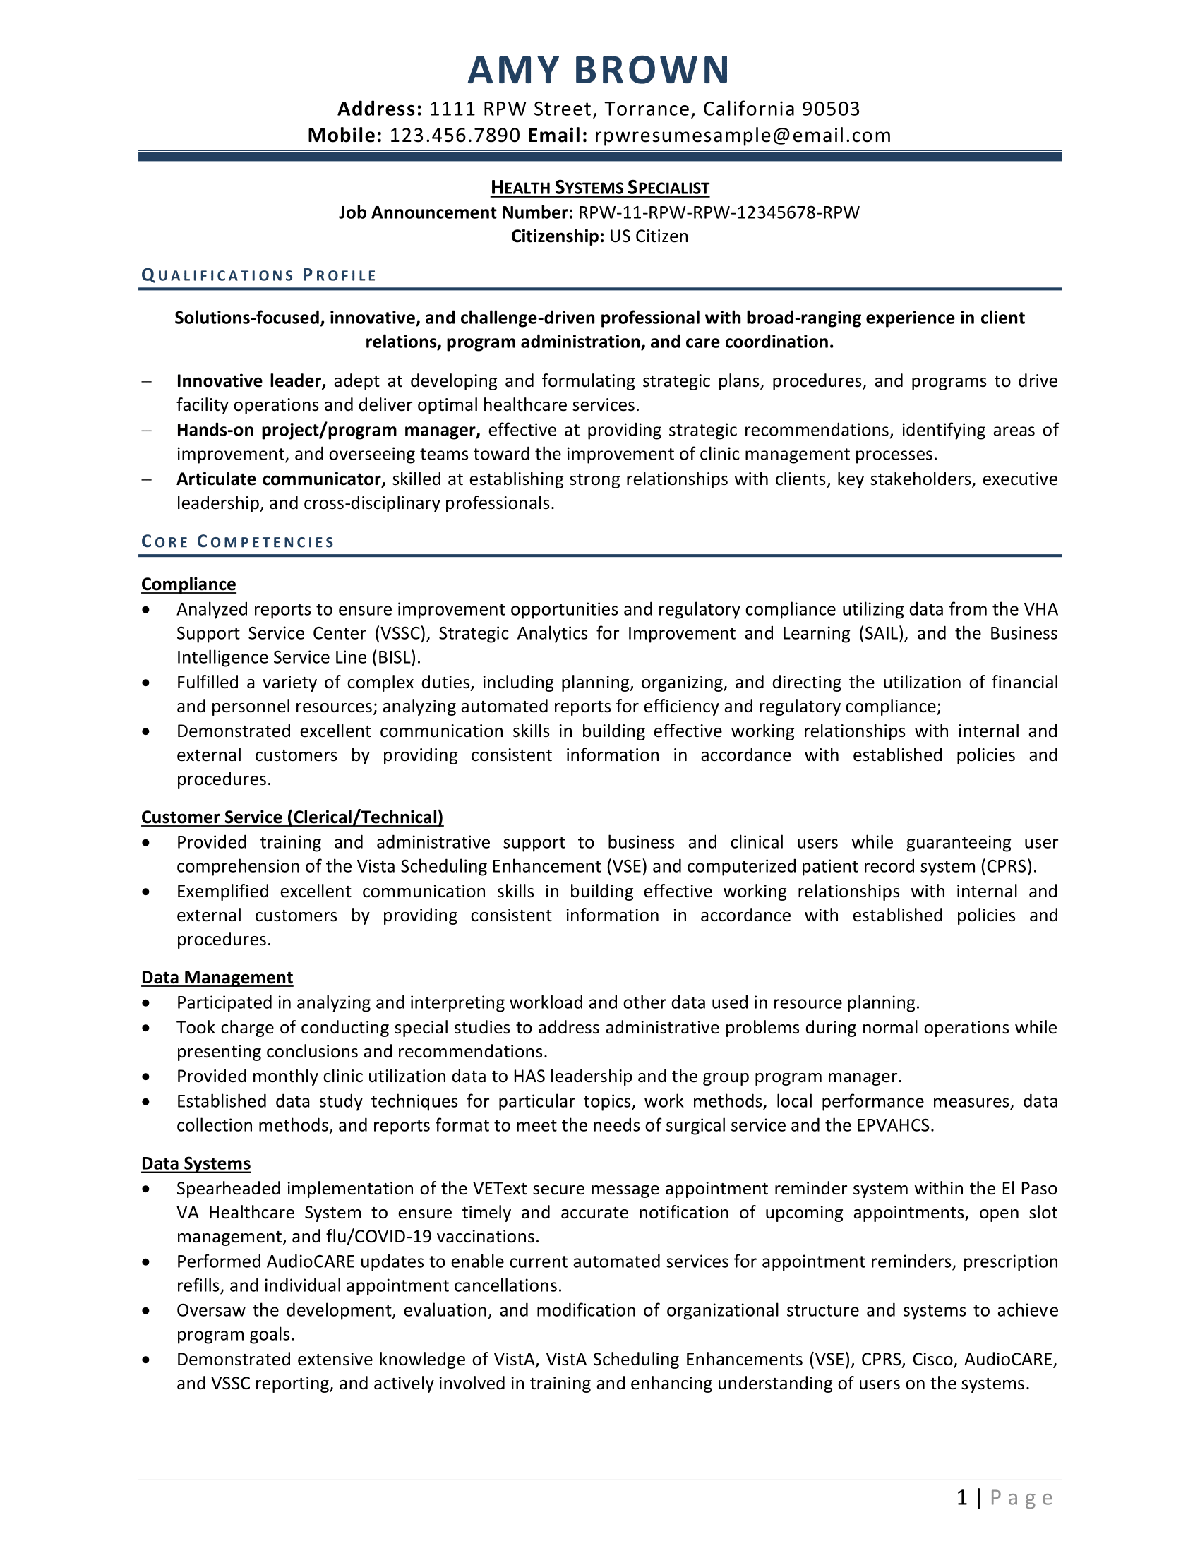 Health Systems Specialist Federal Resume Example Page 1